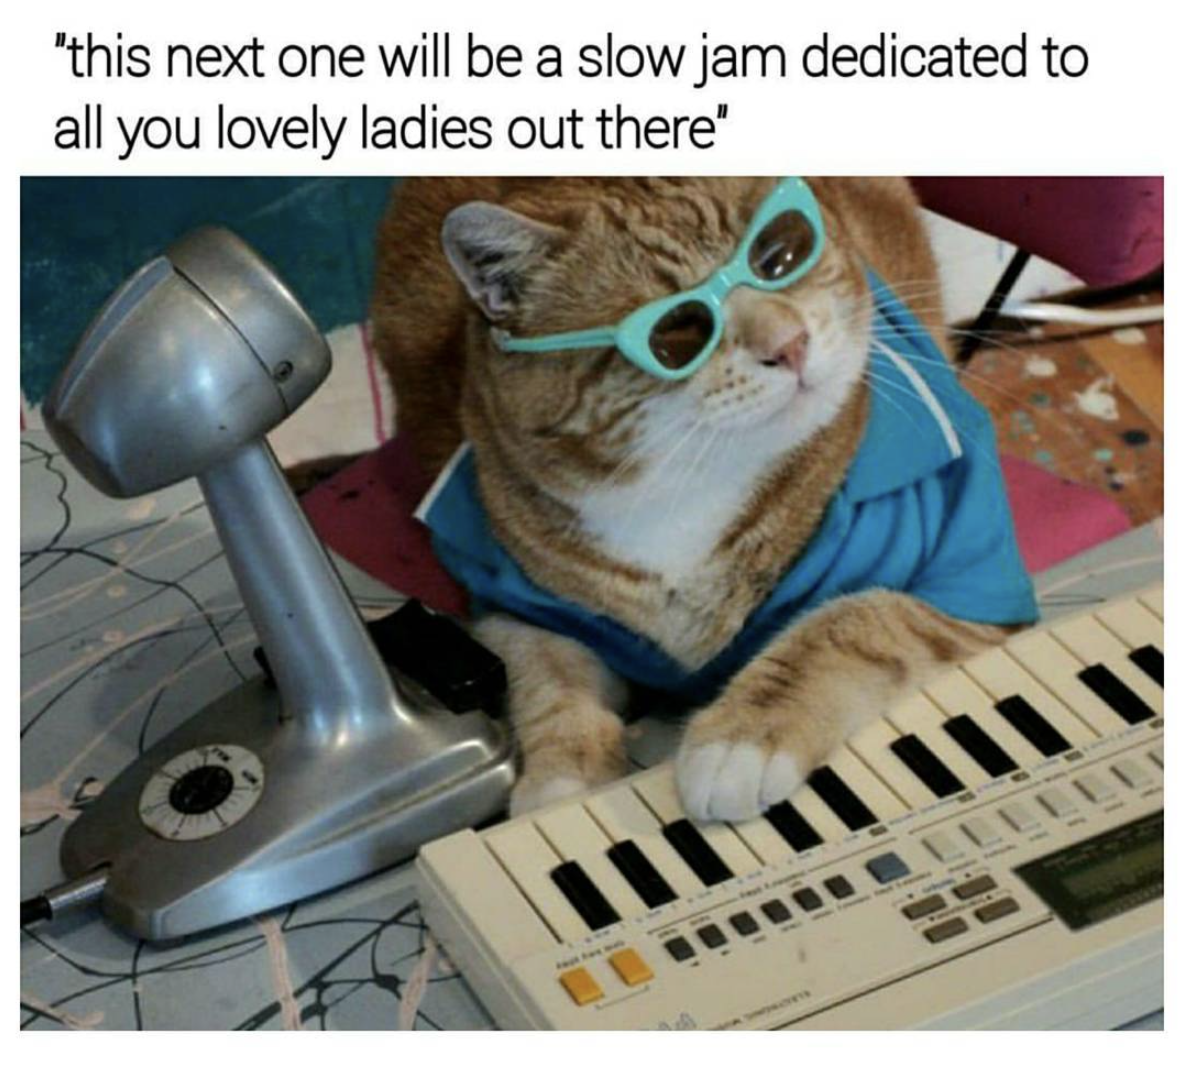 Cat that looks like a pimping keyboard player.